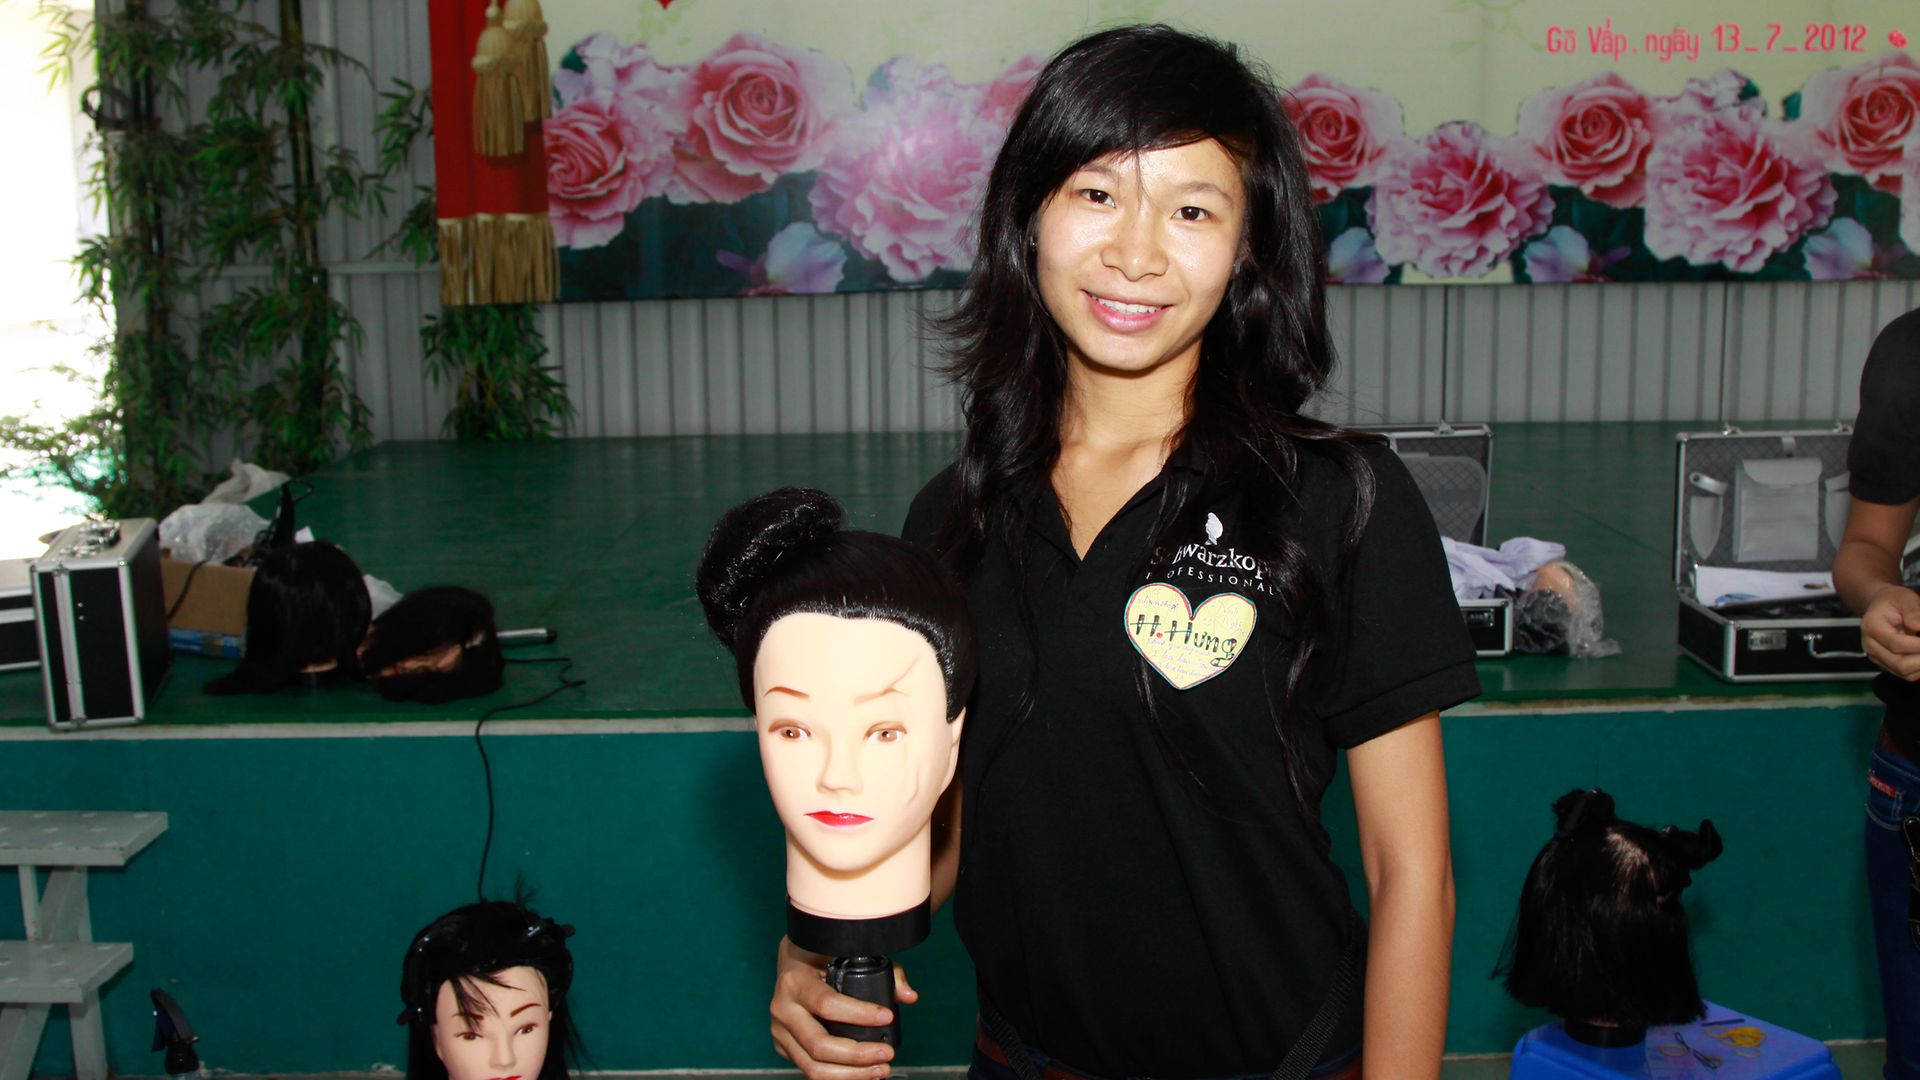 After Shaping Futures has offered Hung a hairdressing training in 2012 she has secured herself a job in Ho CHi Minh City, Vietnam.